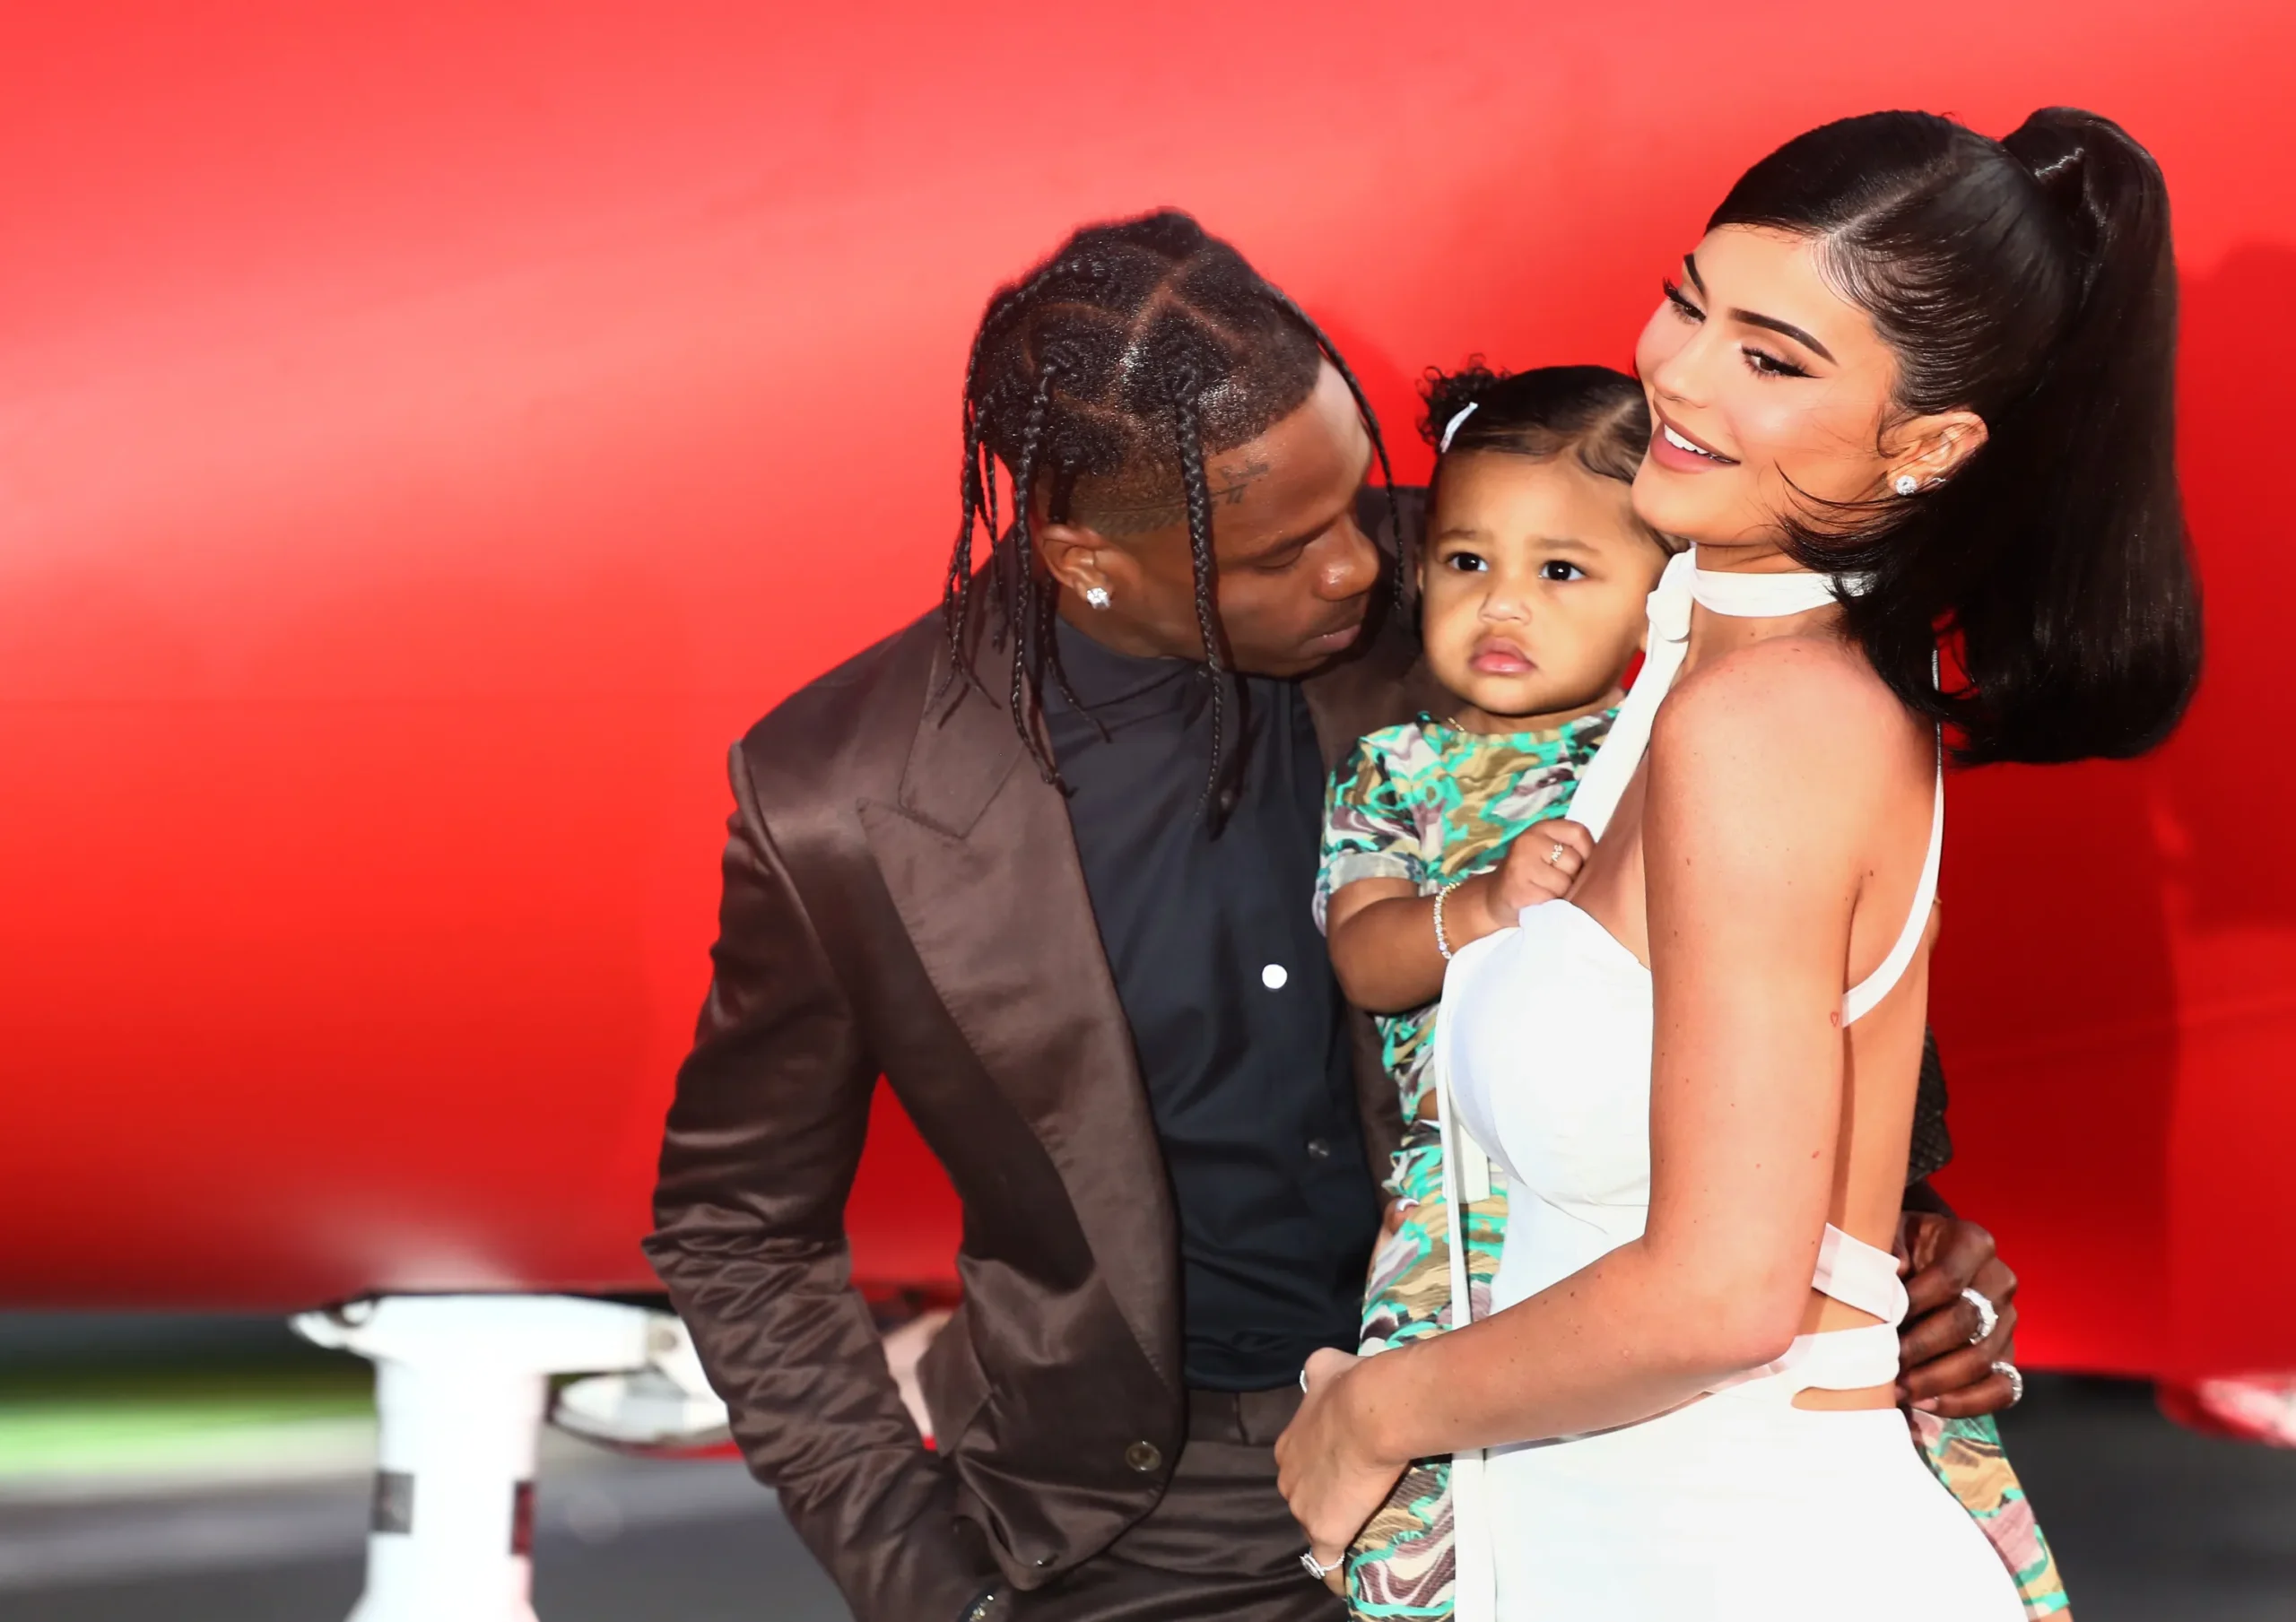 Again, Kylie Jenner and Travis Scott end their relationship